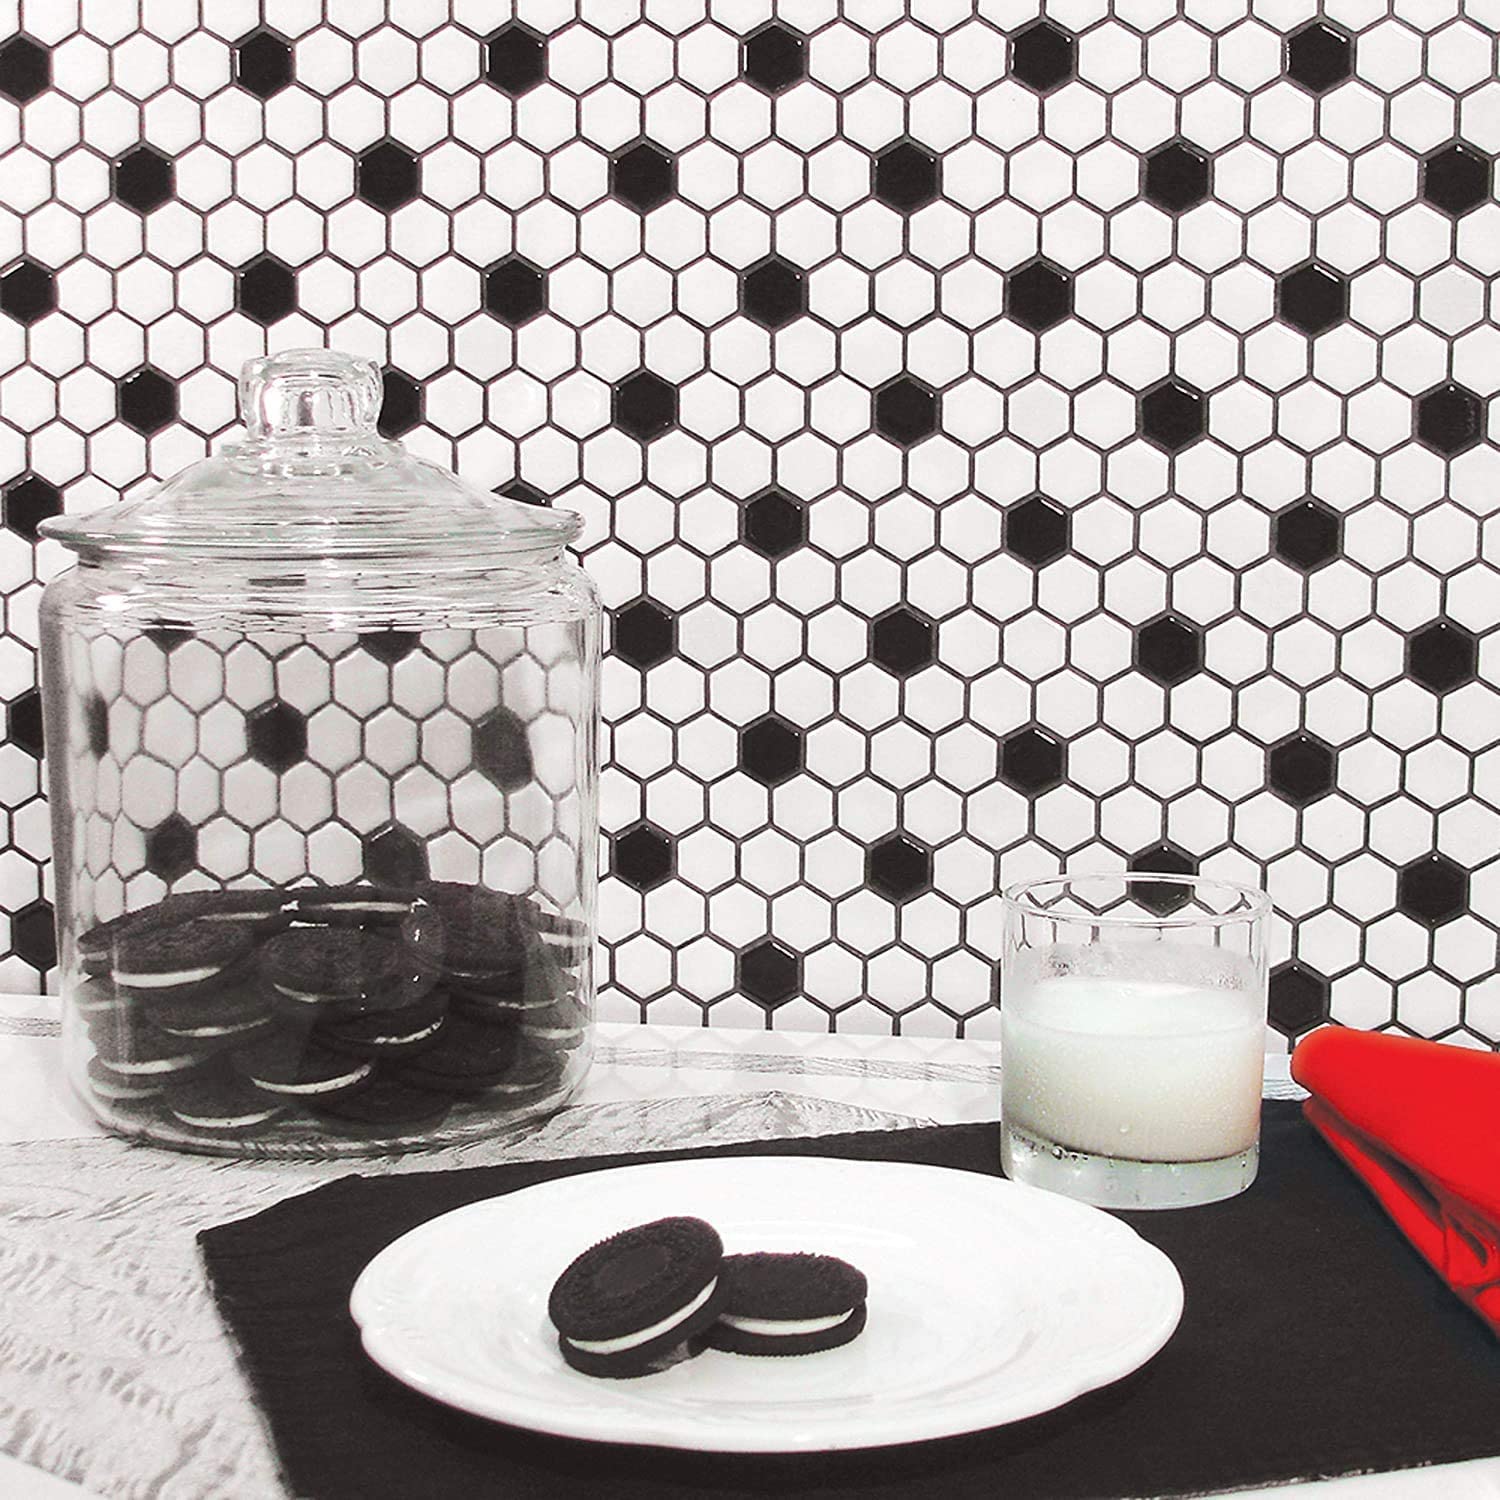 Hexagon White with Black Dots Porcelain Mosaic Floor and Wall Tile Matte Look for Kitchen Backsplash, Bathroom Wall, Accent Wall